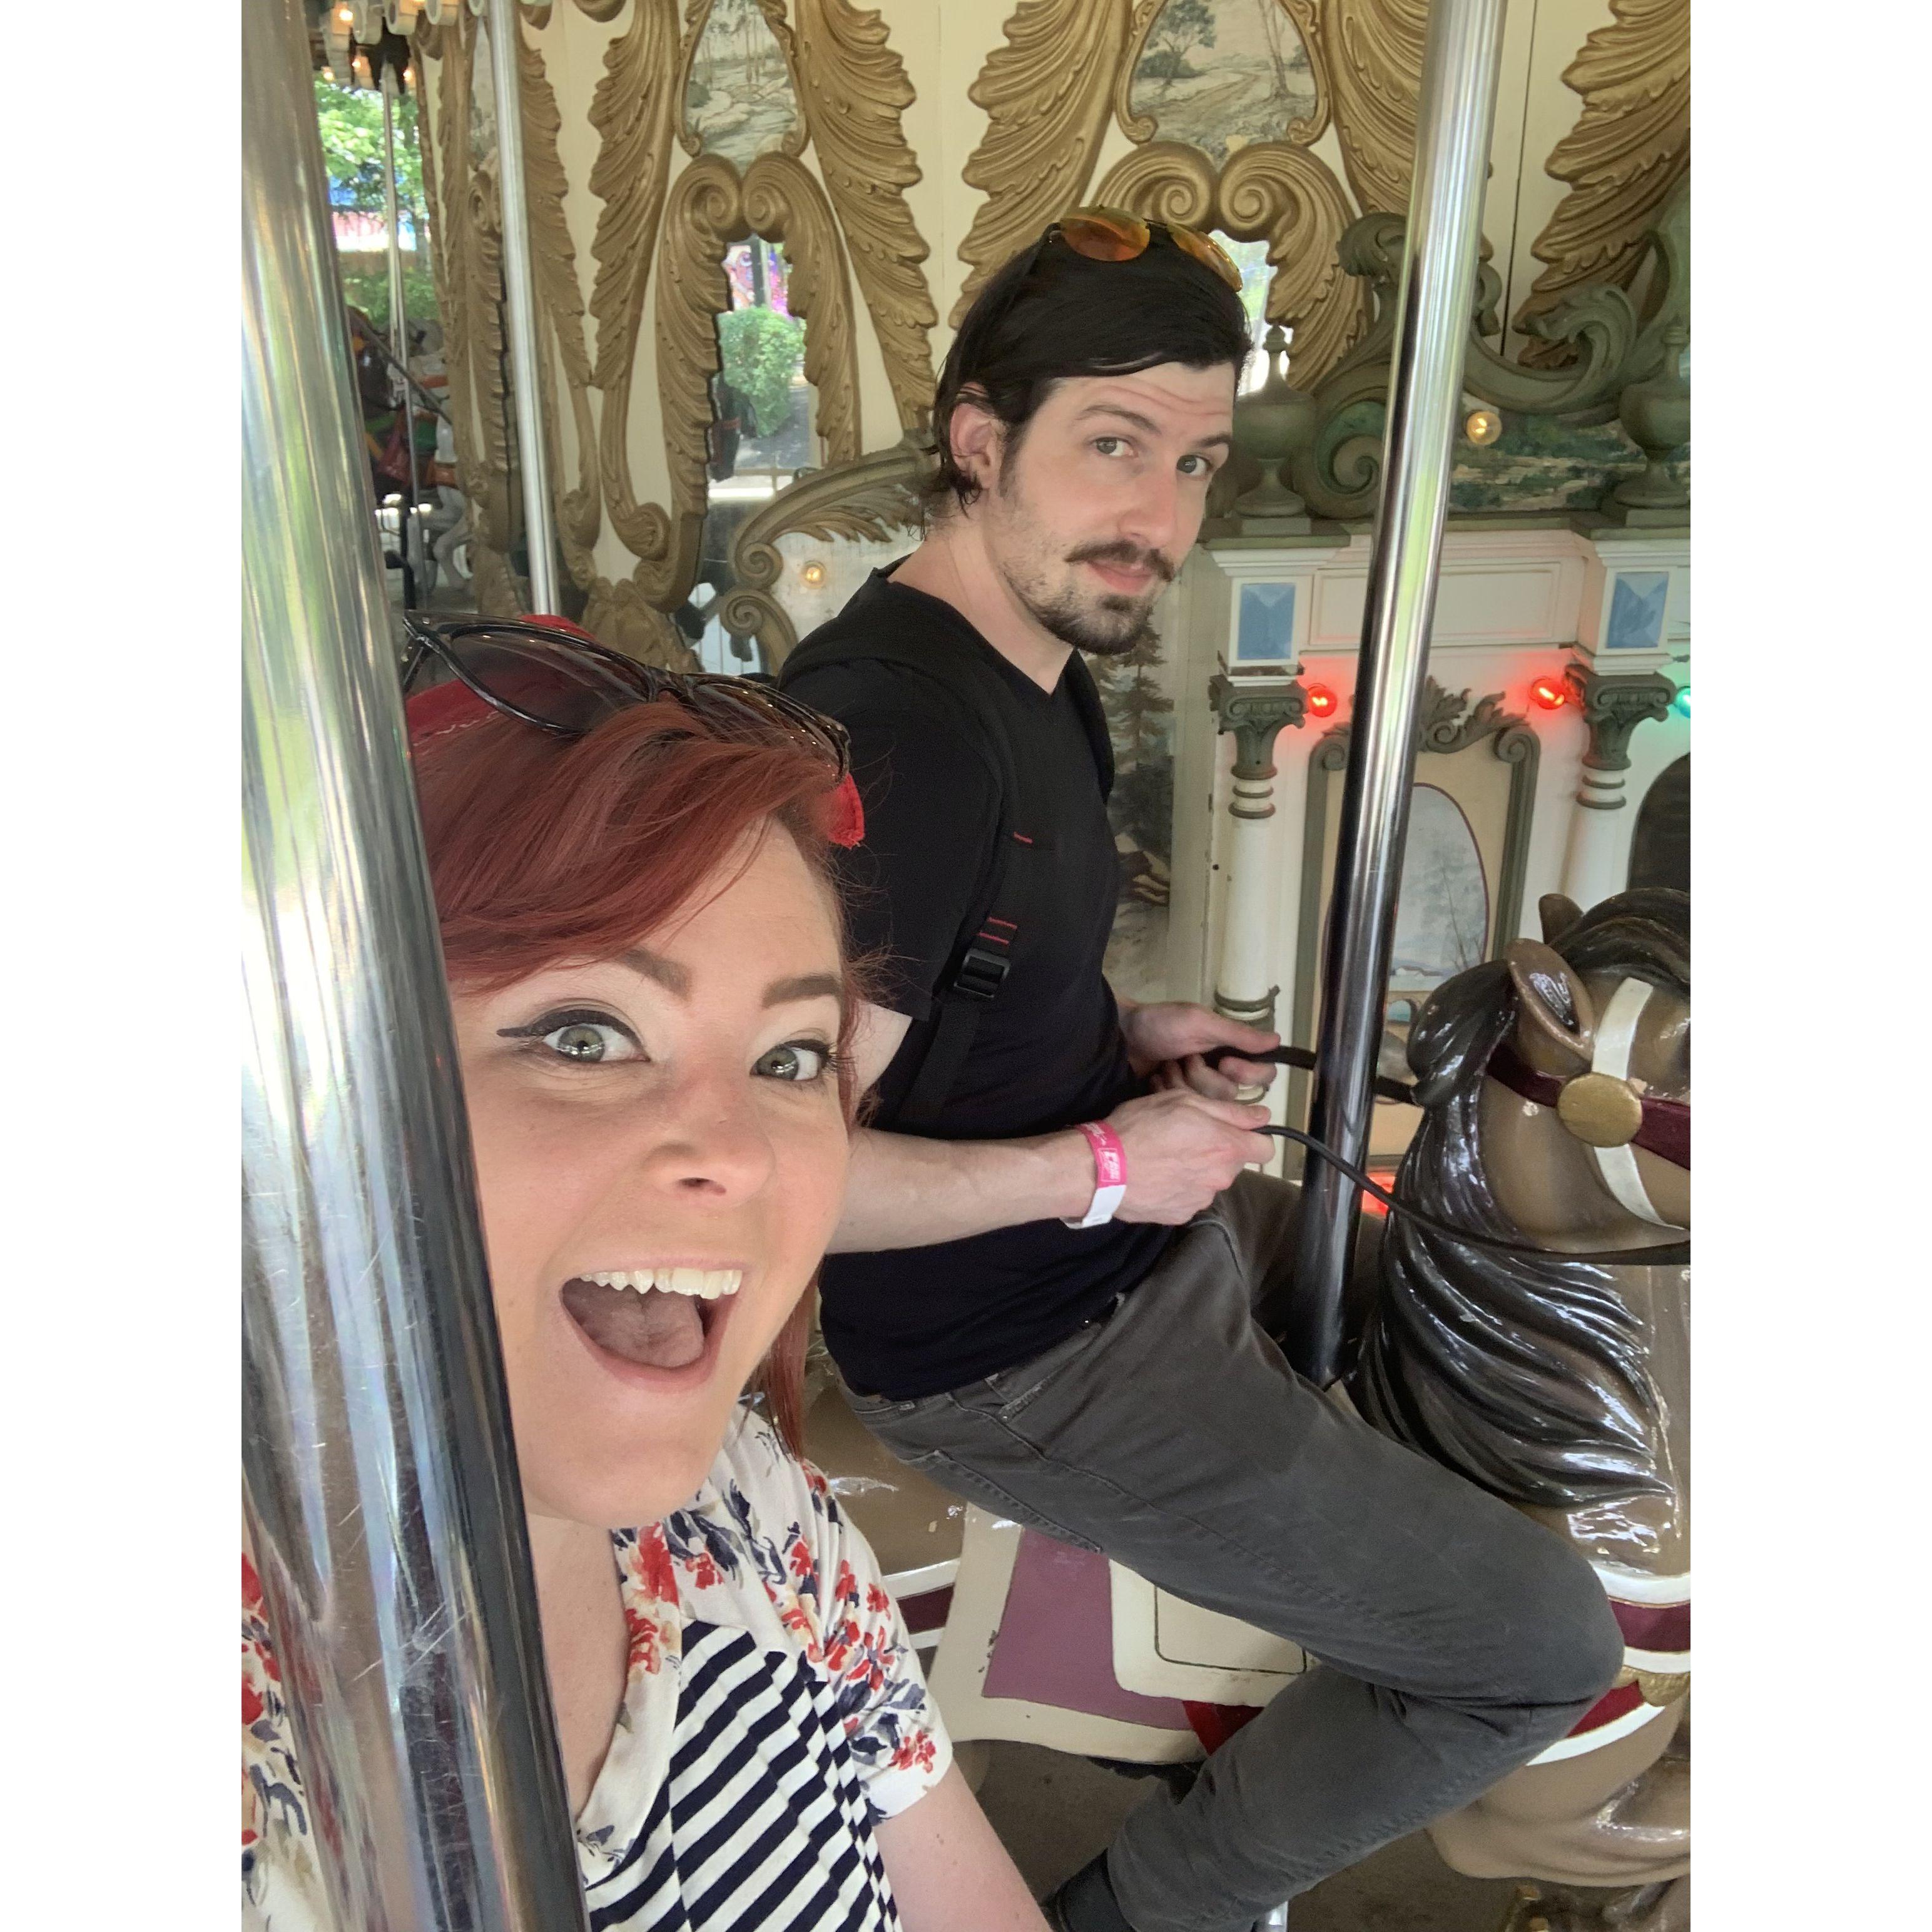 Our annual tradition: riding the carousel at Kings Island (June 2019)